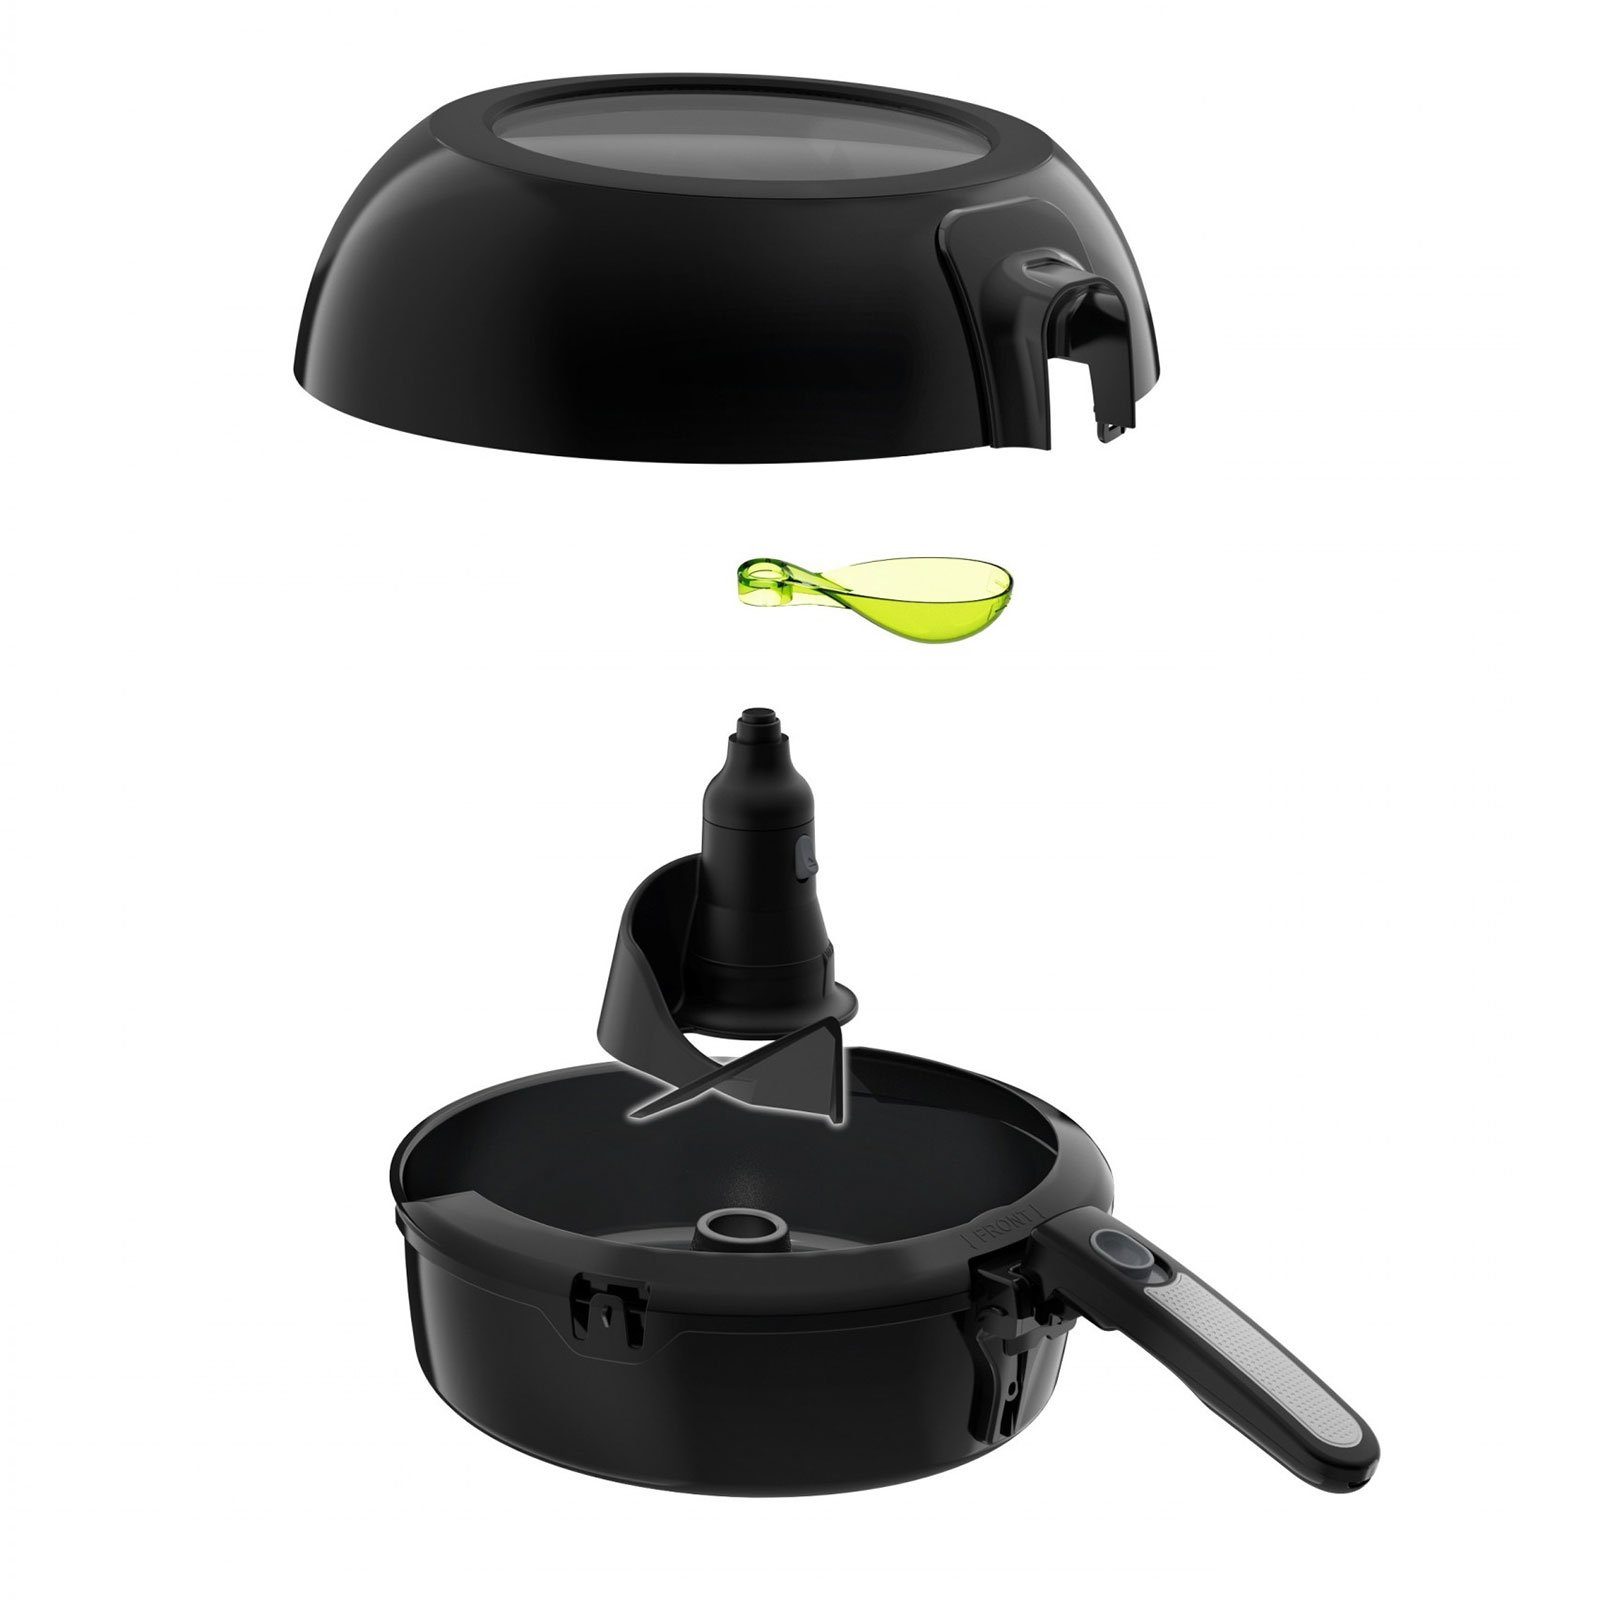 Tefal Fritteuse 773815 Genius 1550 W FZ Heißluft-Fritteuse, ActiFry Smart